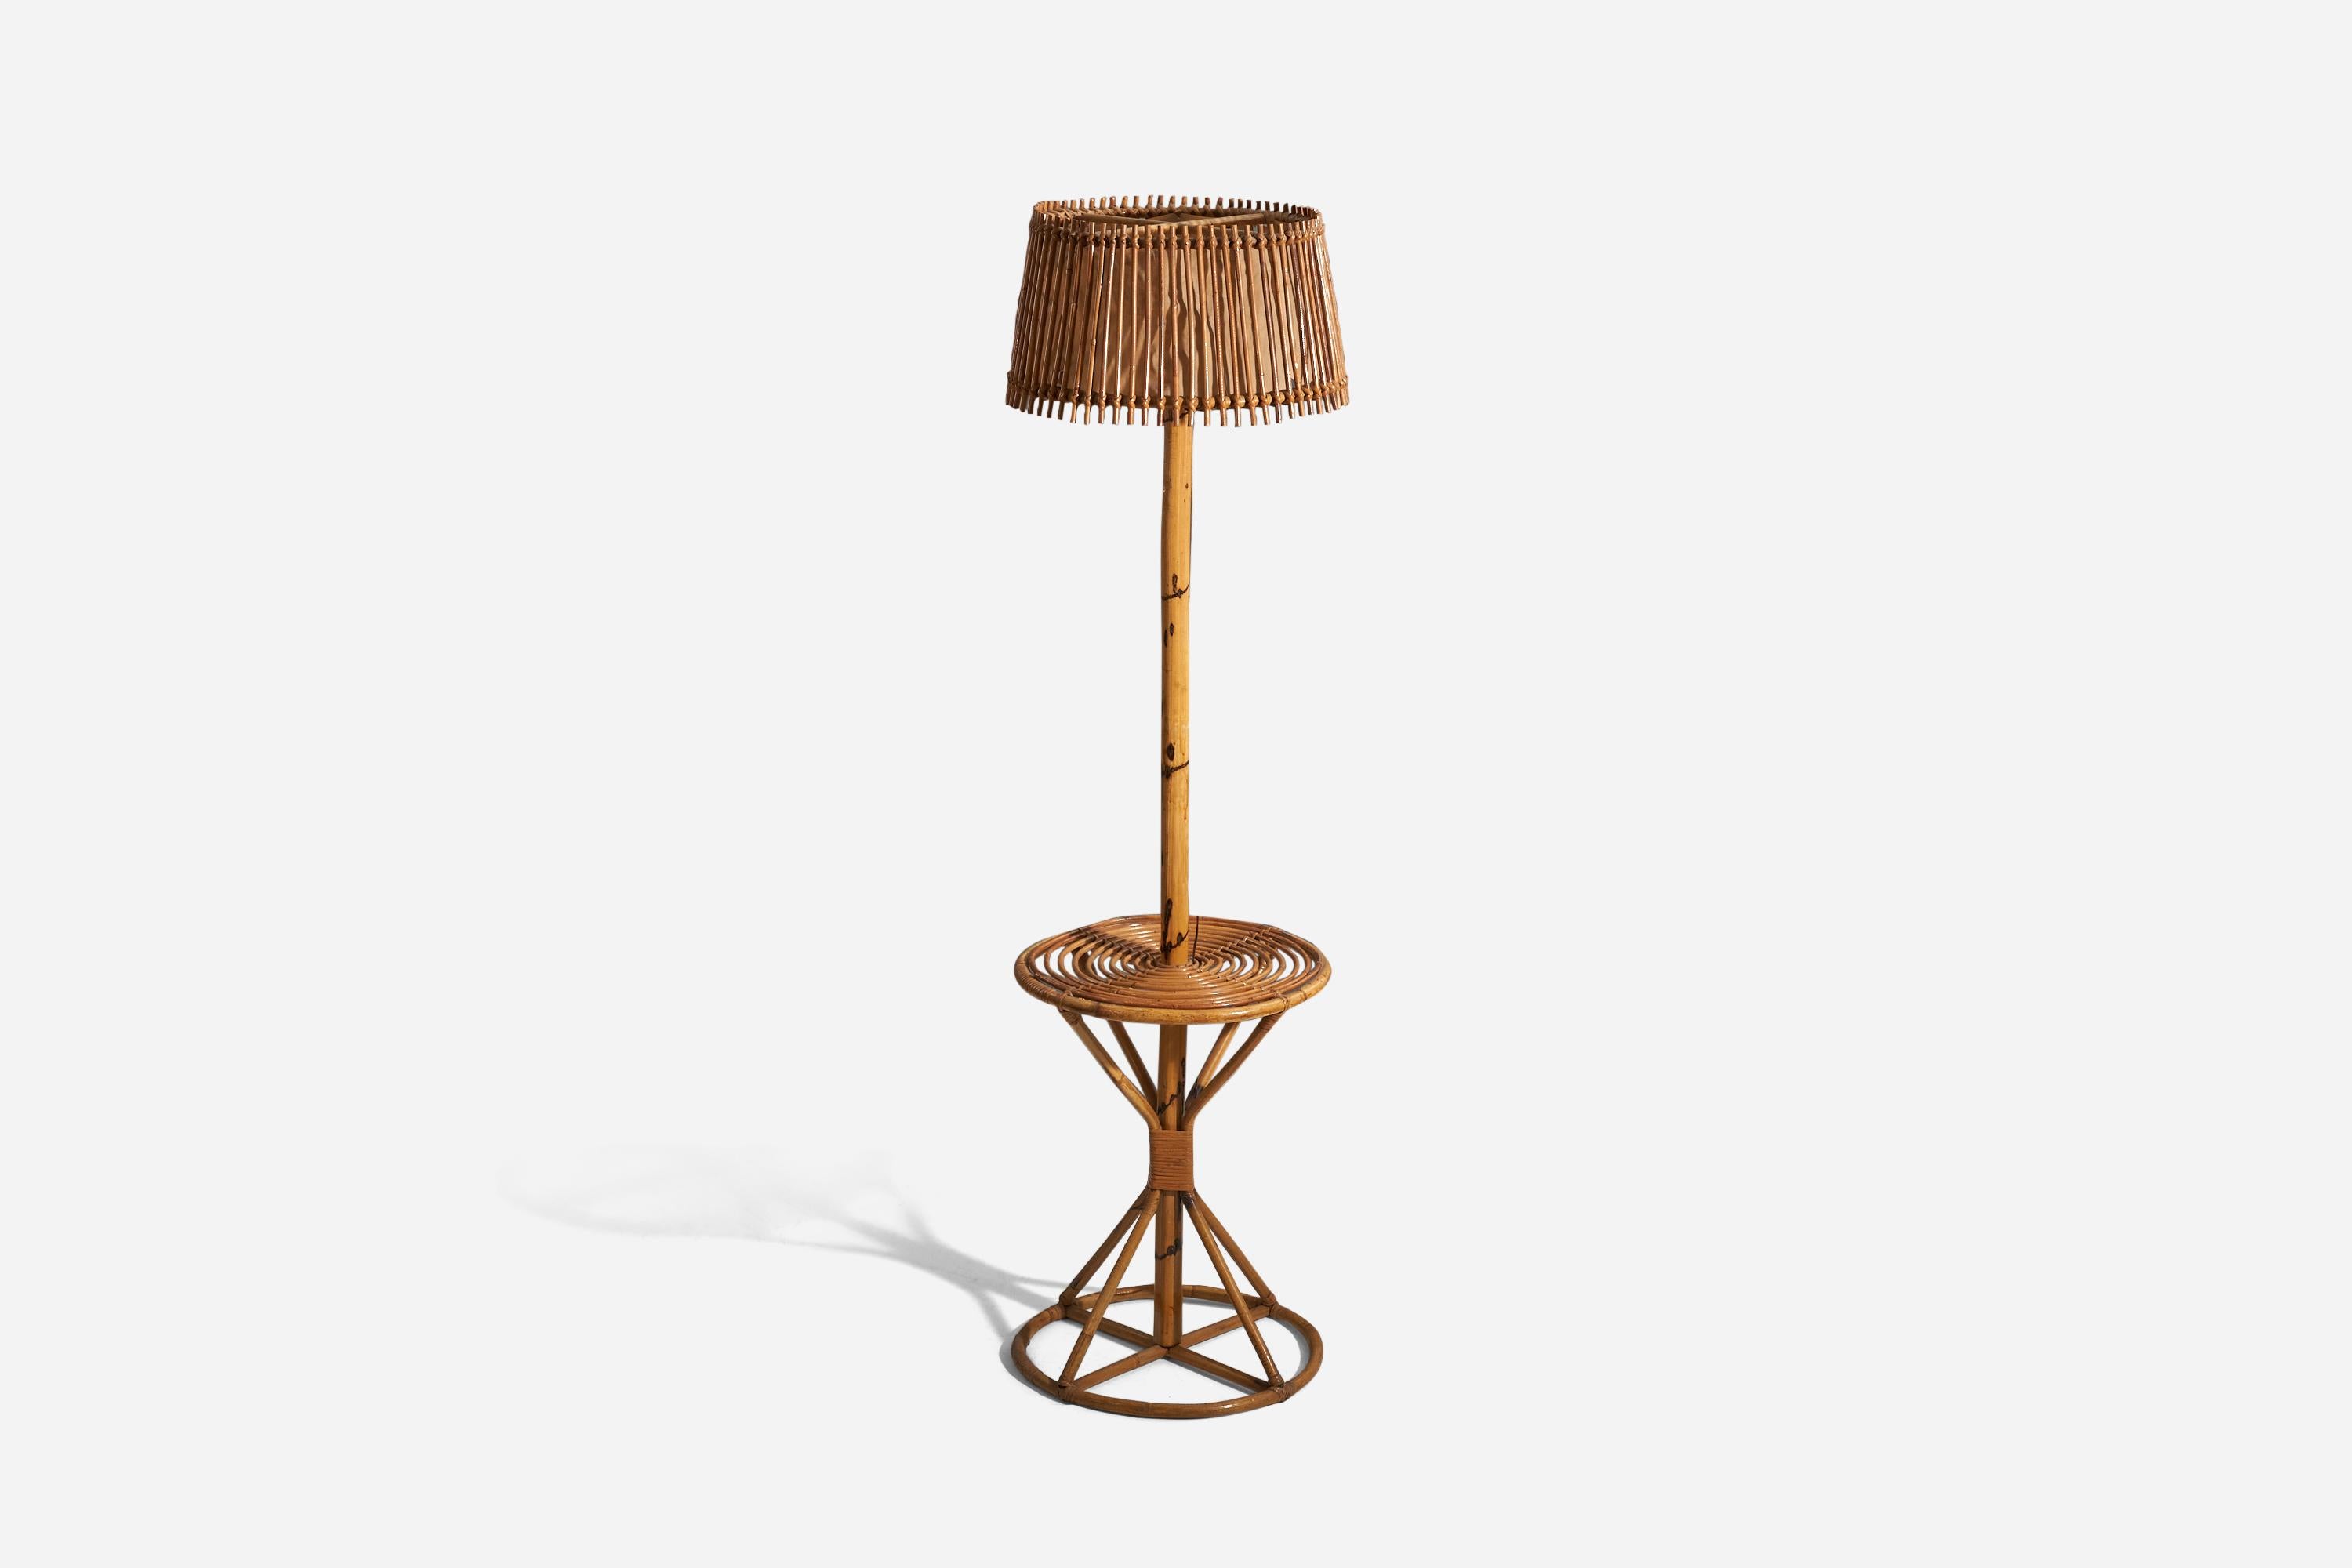 A bamboo and rattan floor lamp designed and produced by an Italian designer, Italy, 1960s.

